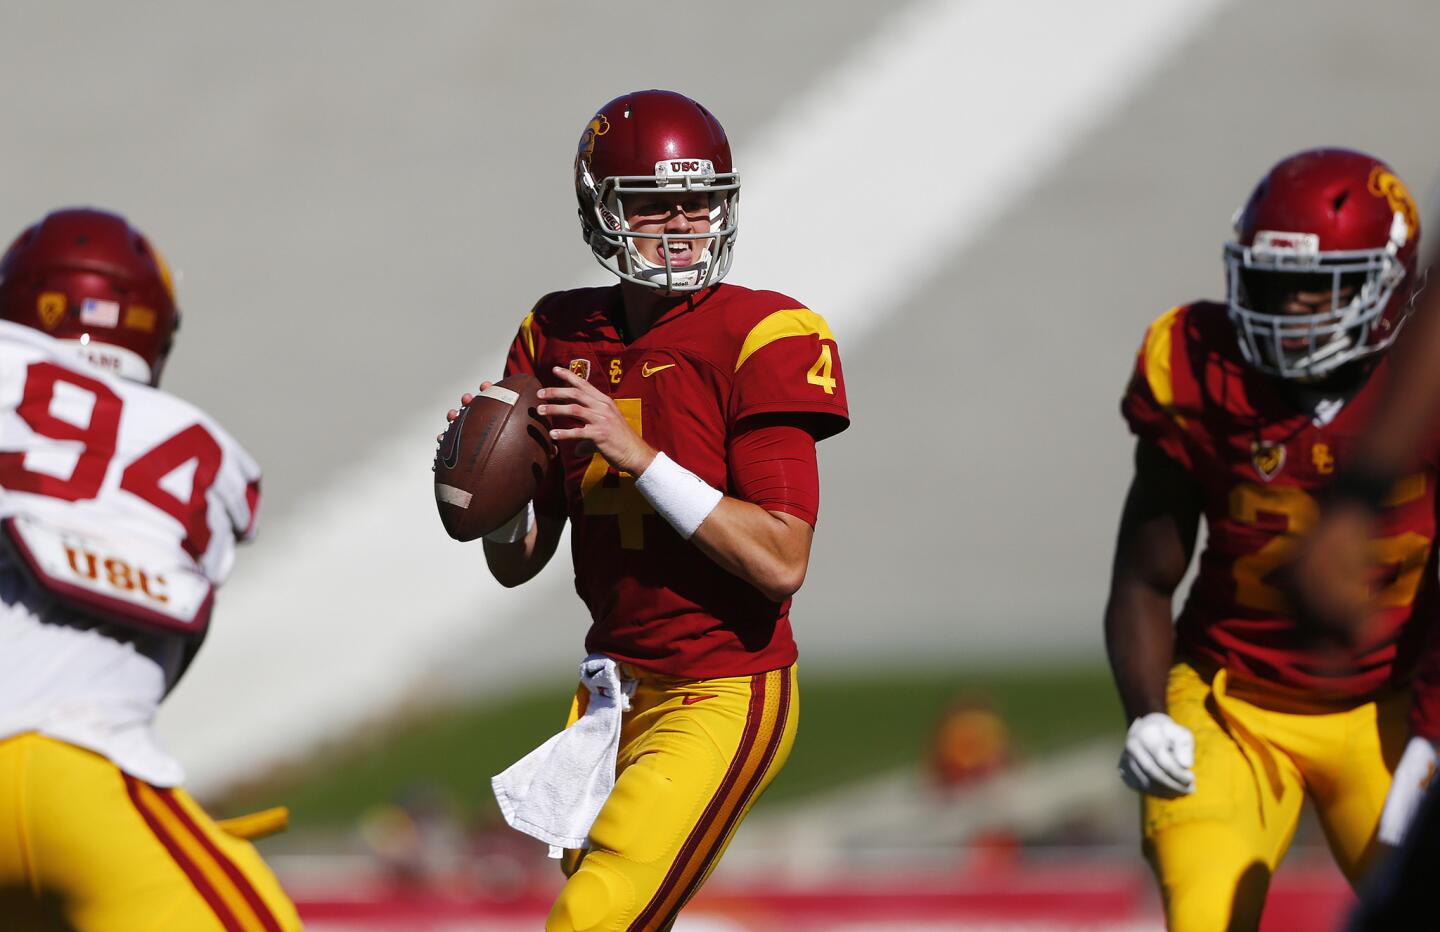 Quarterback Max Browne looks for an open receiver during USC's spring game. Browne completed seven of 11 passes for 114 yards and three touchfowns with no interceptions.